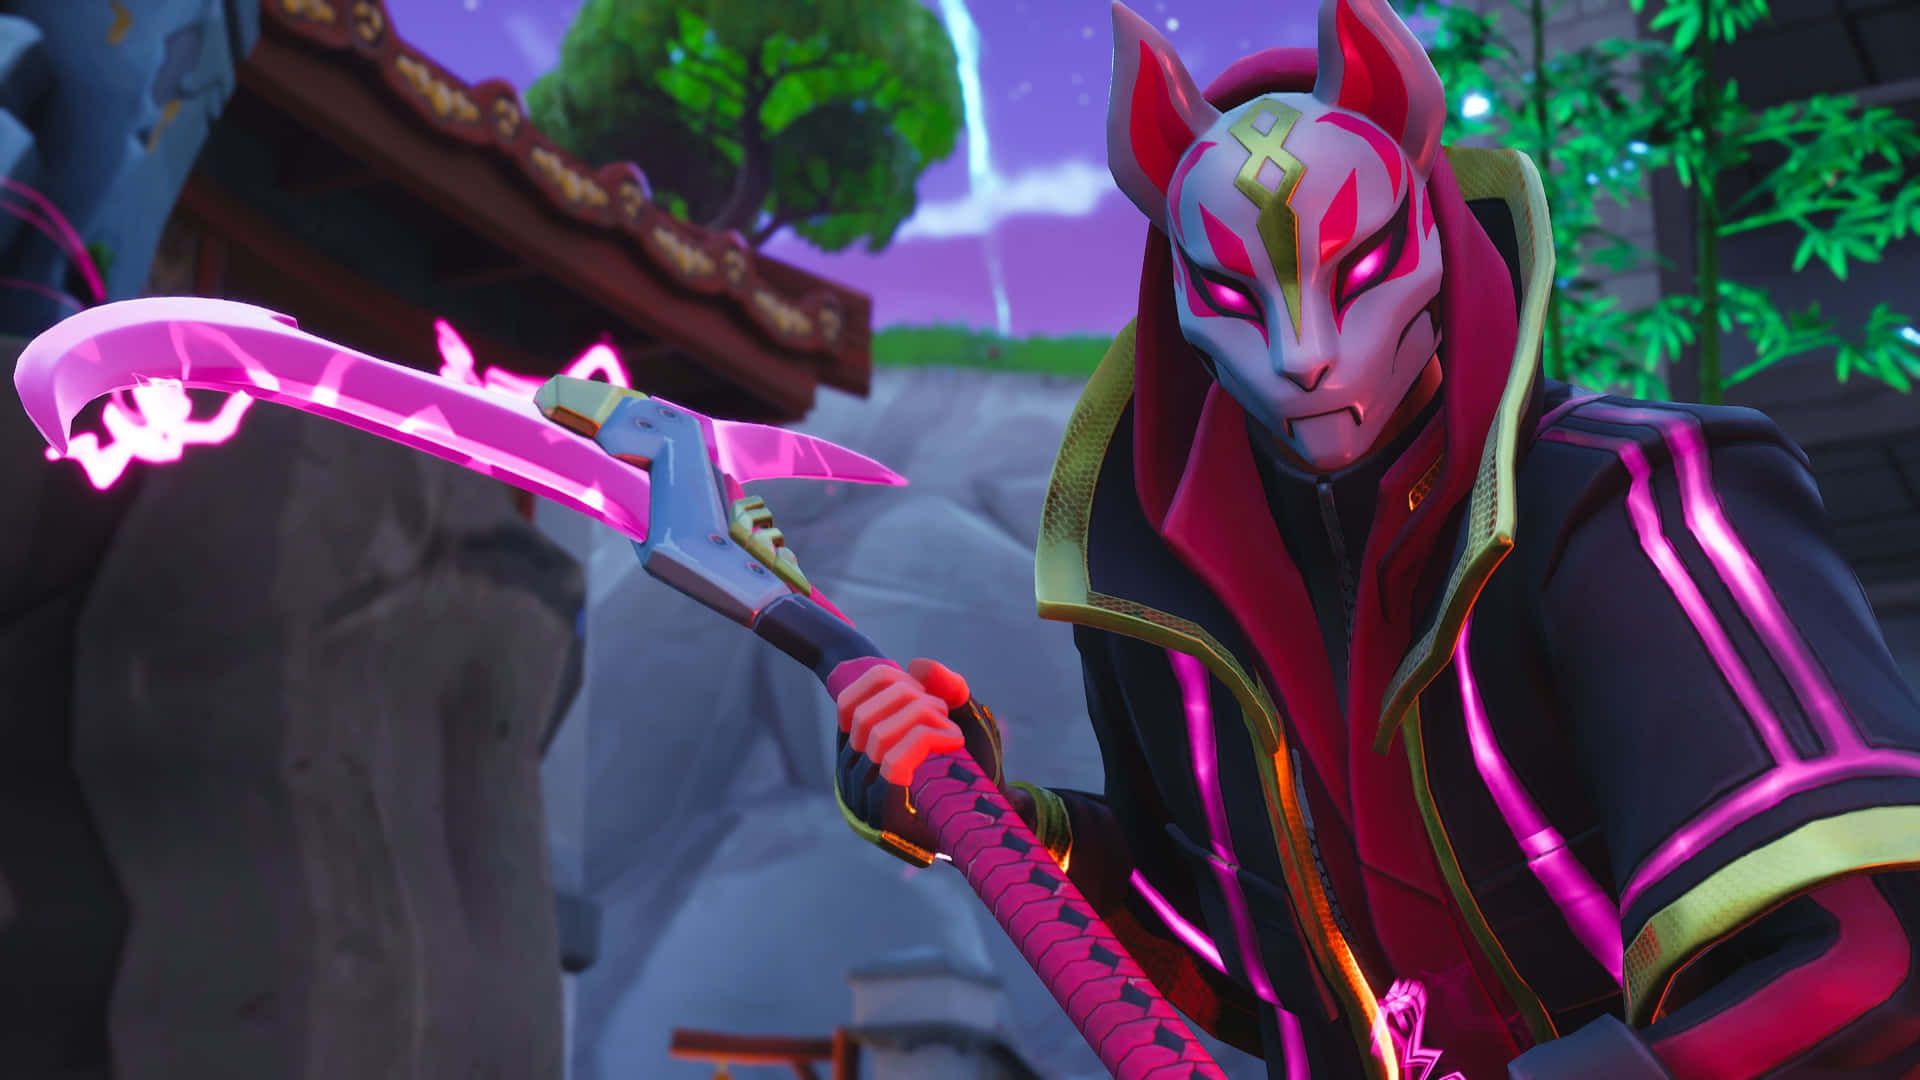 Dive in and explore the world of Fortnite + Drift Wallpaper